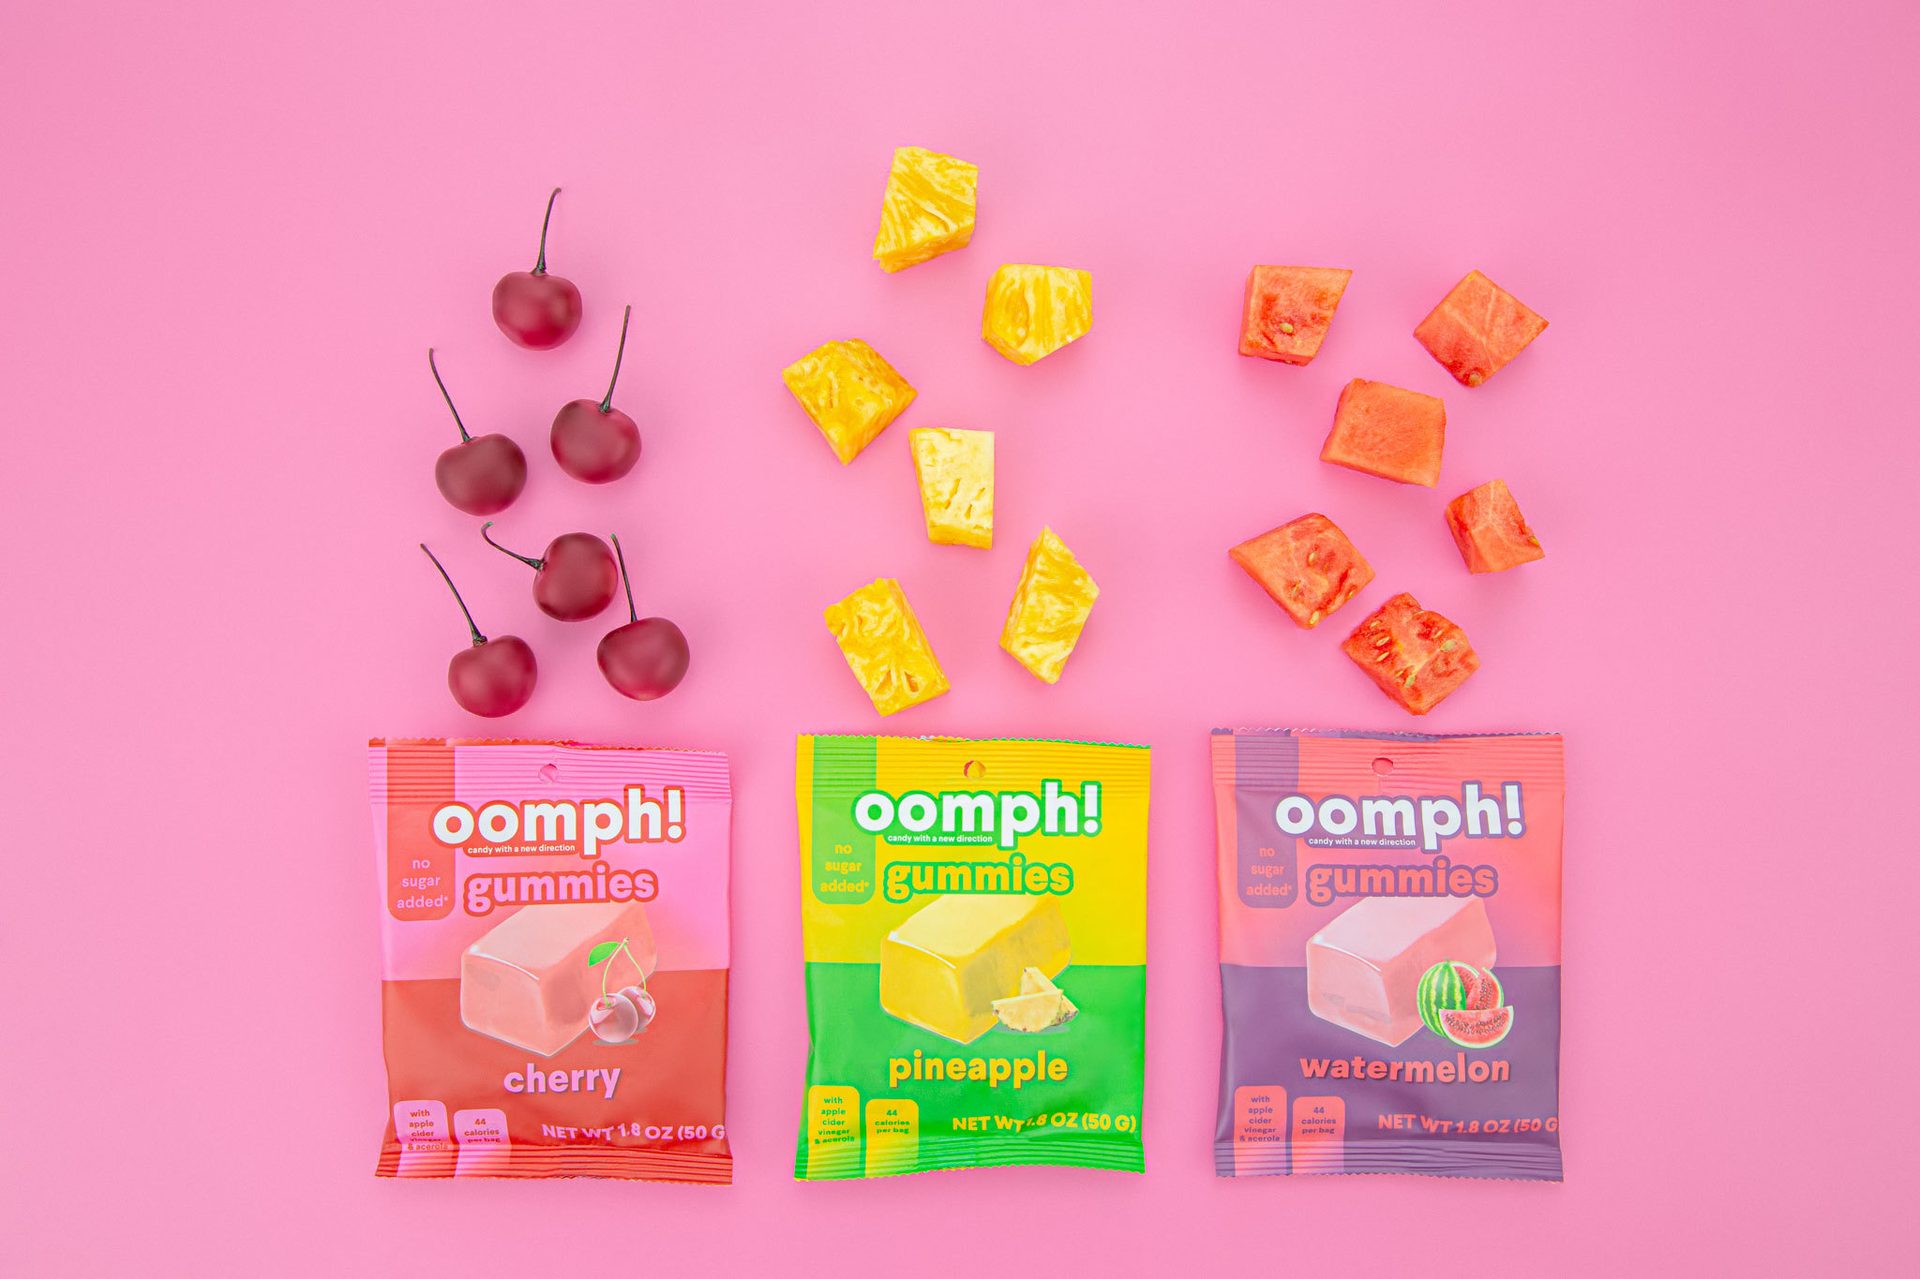 Font, Packages, Fruit, Gummy candy, Pink